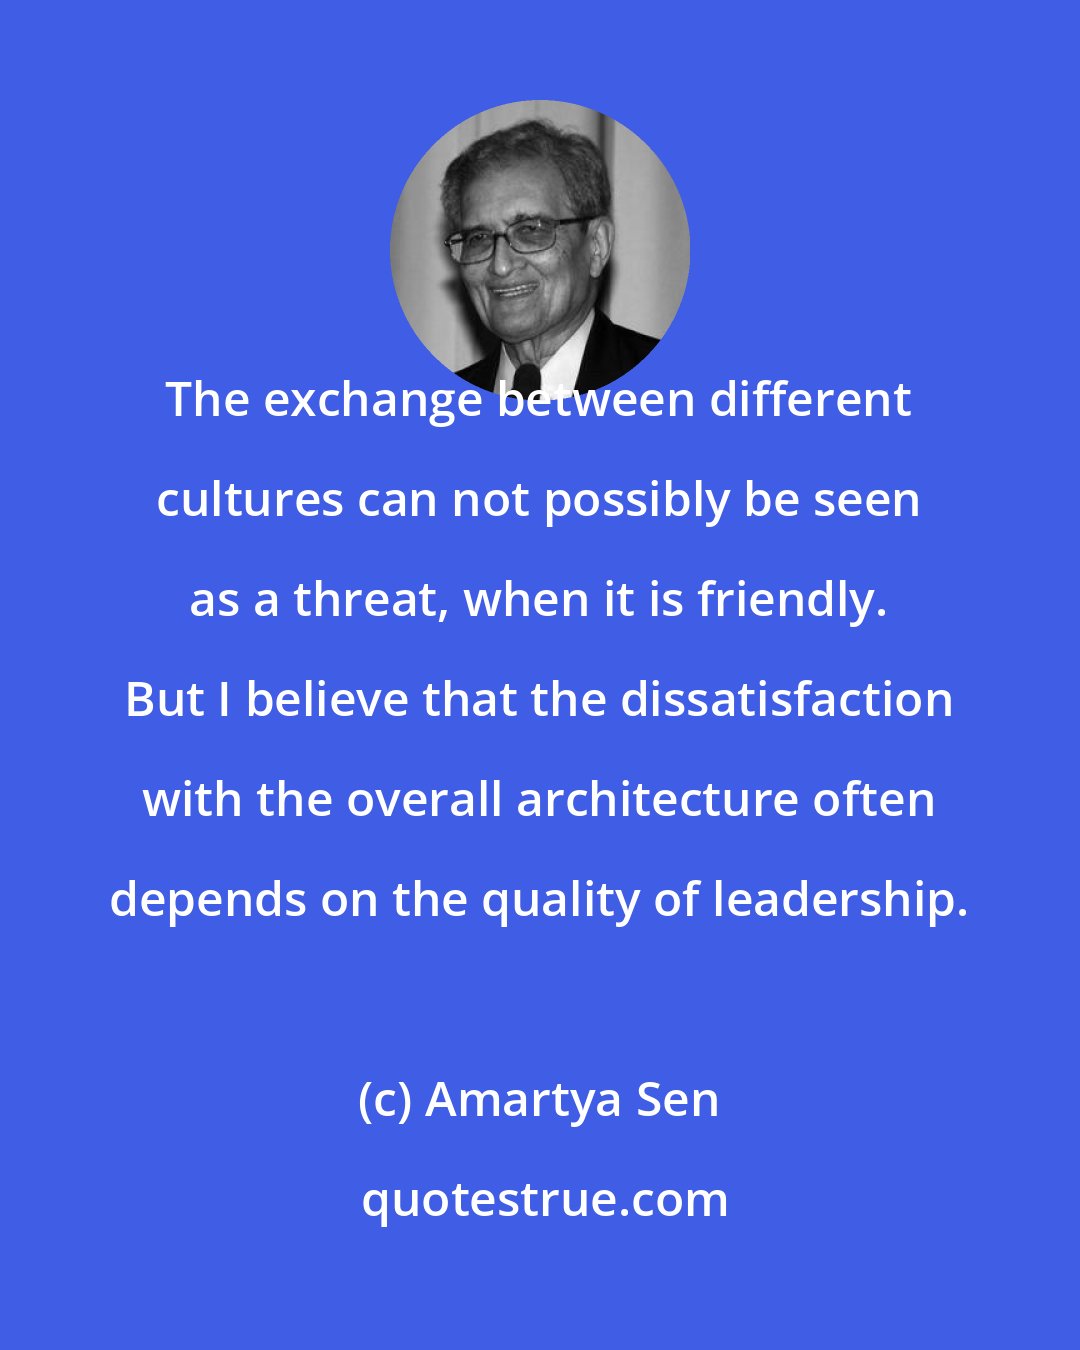 Amartya Sen: The exchange between different cultures can not possibly be seen as a threat, when it is friendly. But I believe that the dissatisfaction with the overall architecture often depends on the quality of leadership.